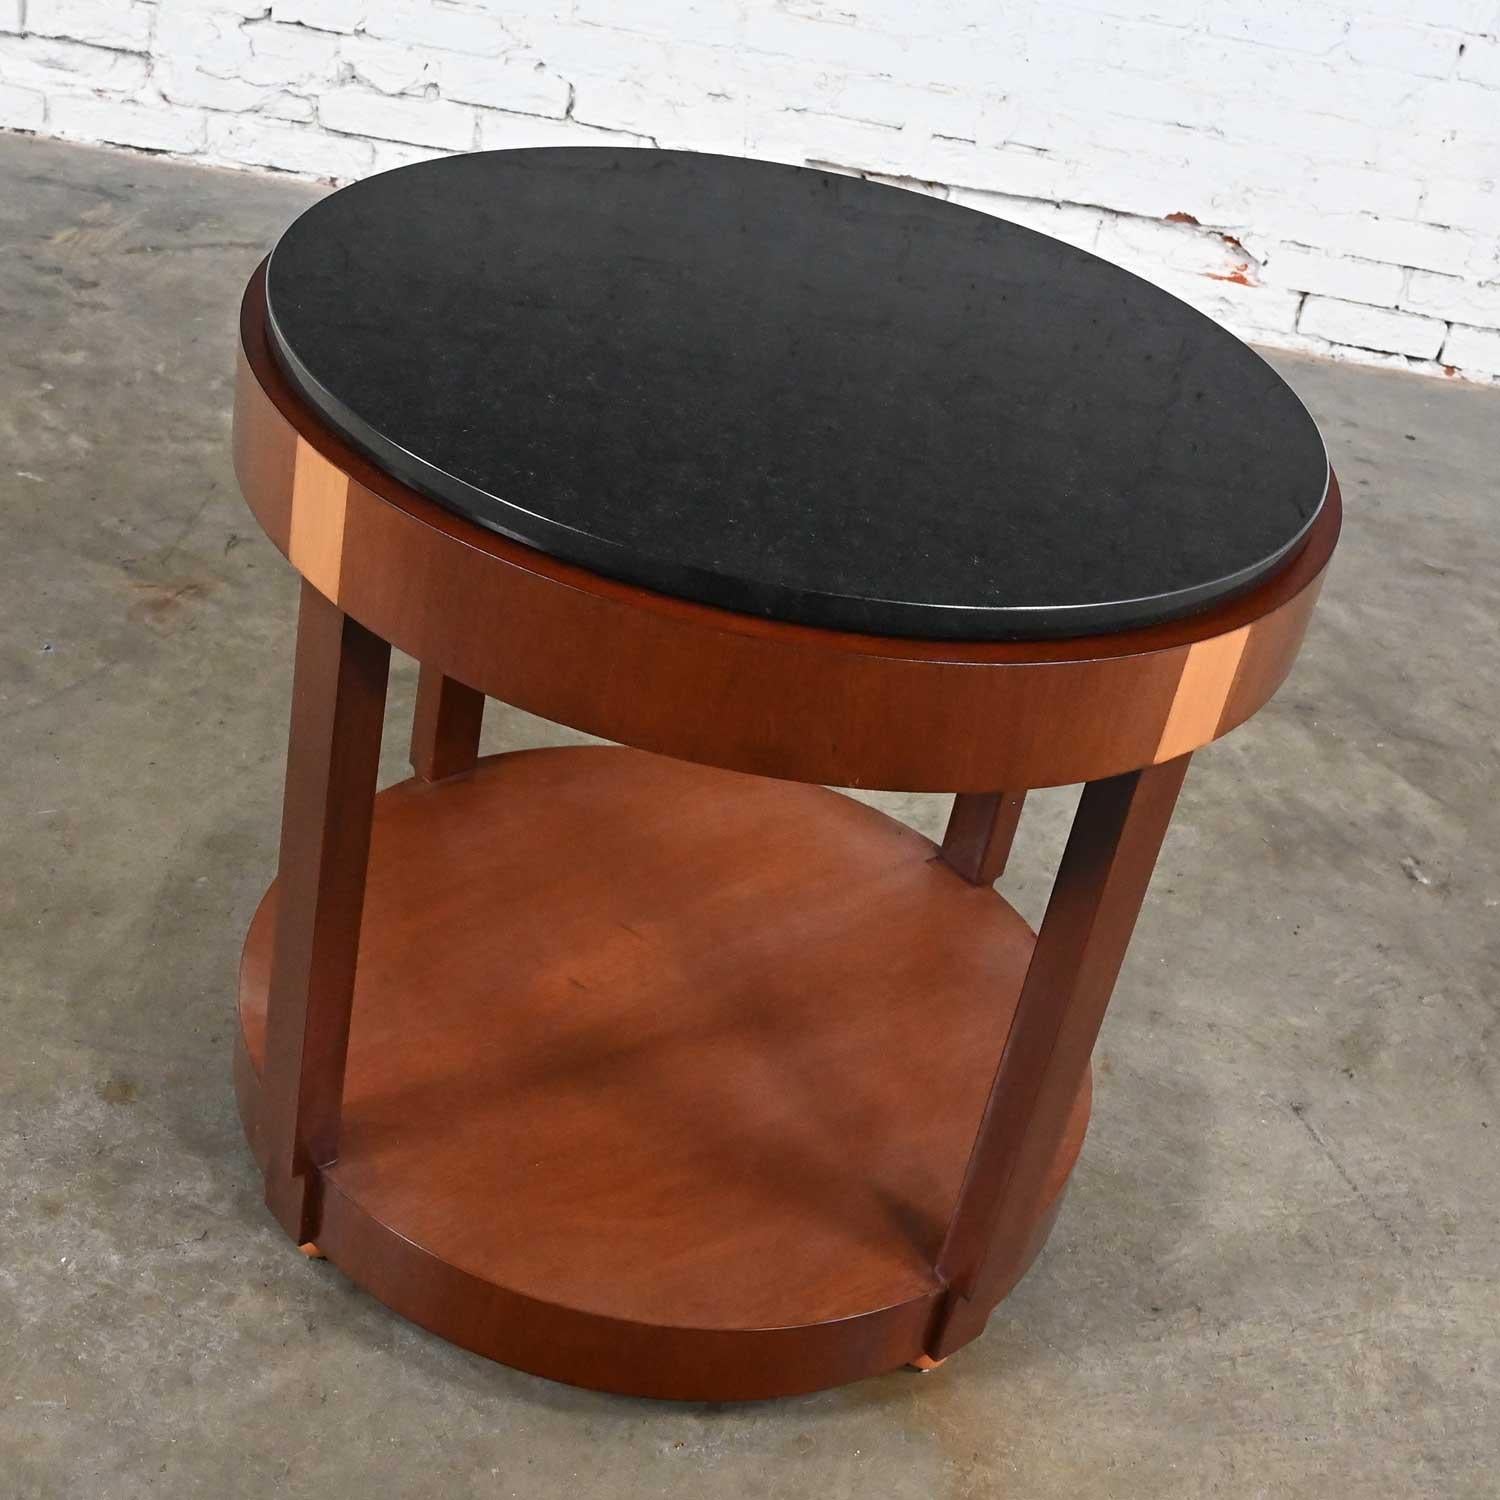 Art Deco Revival Custom Two Toned Mahogany Round Side Table Black Granite Top For Sale 10